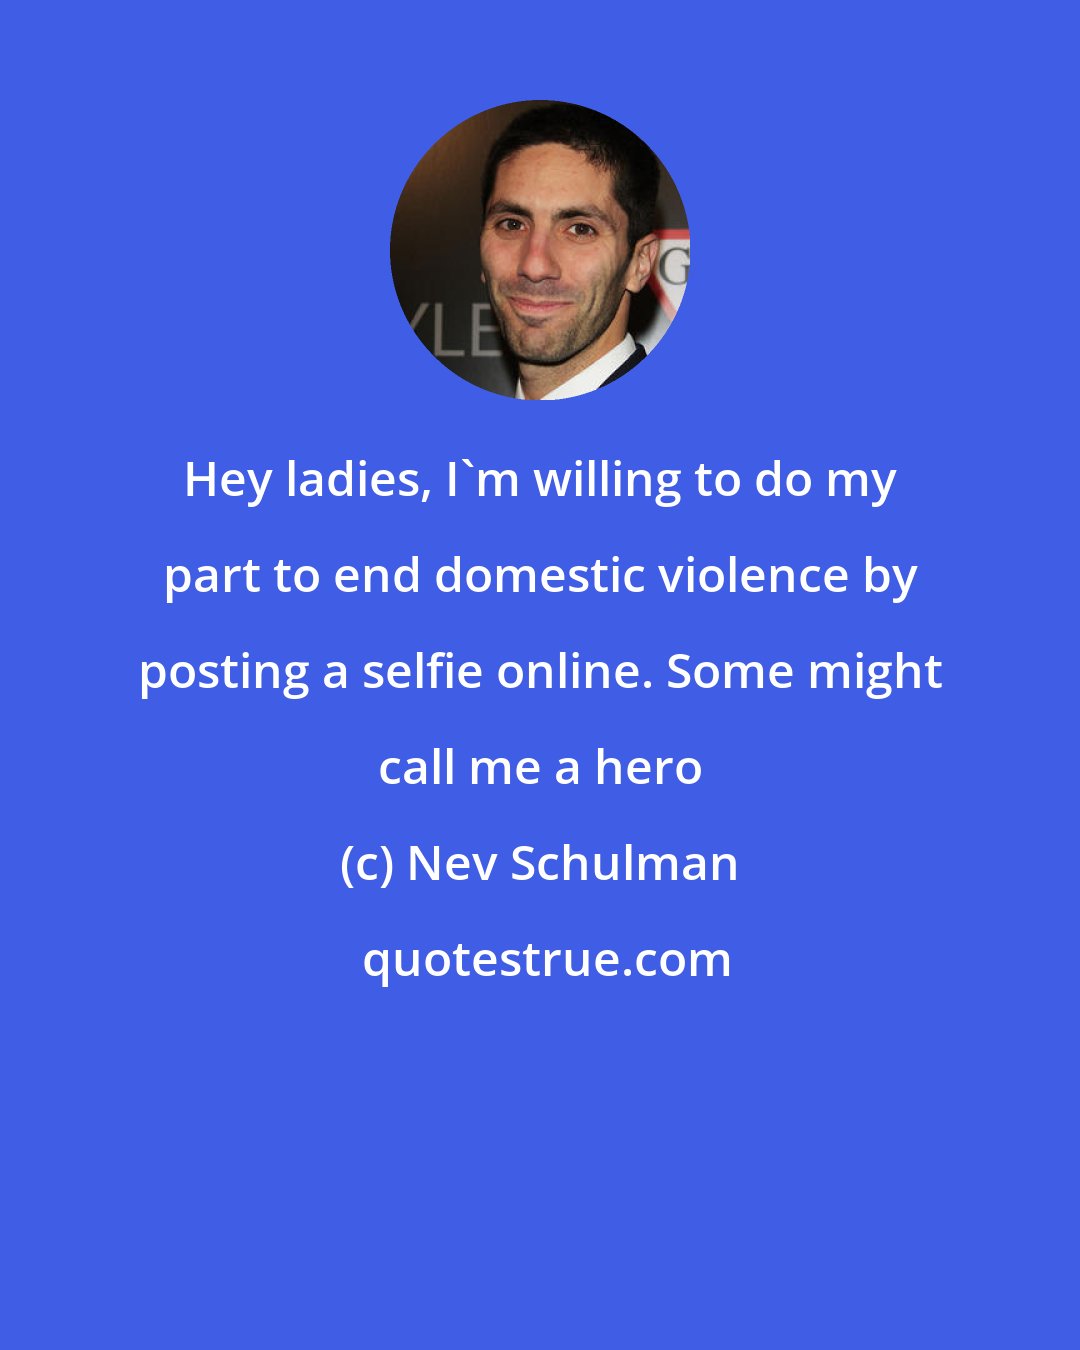 Nev Schulman: Hey ladies, I'm willing to do my part to end domestic violence by posting a selfie online. Some might call me a hero